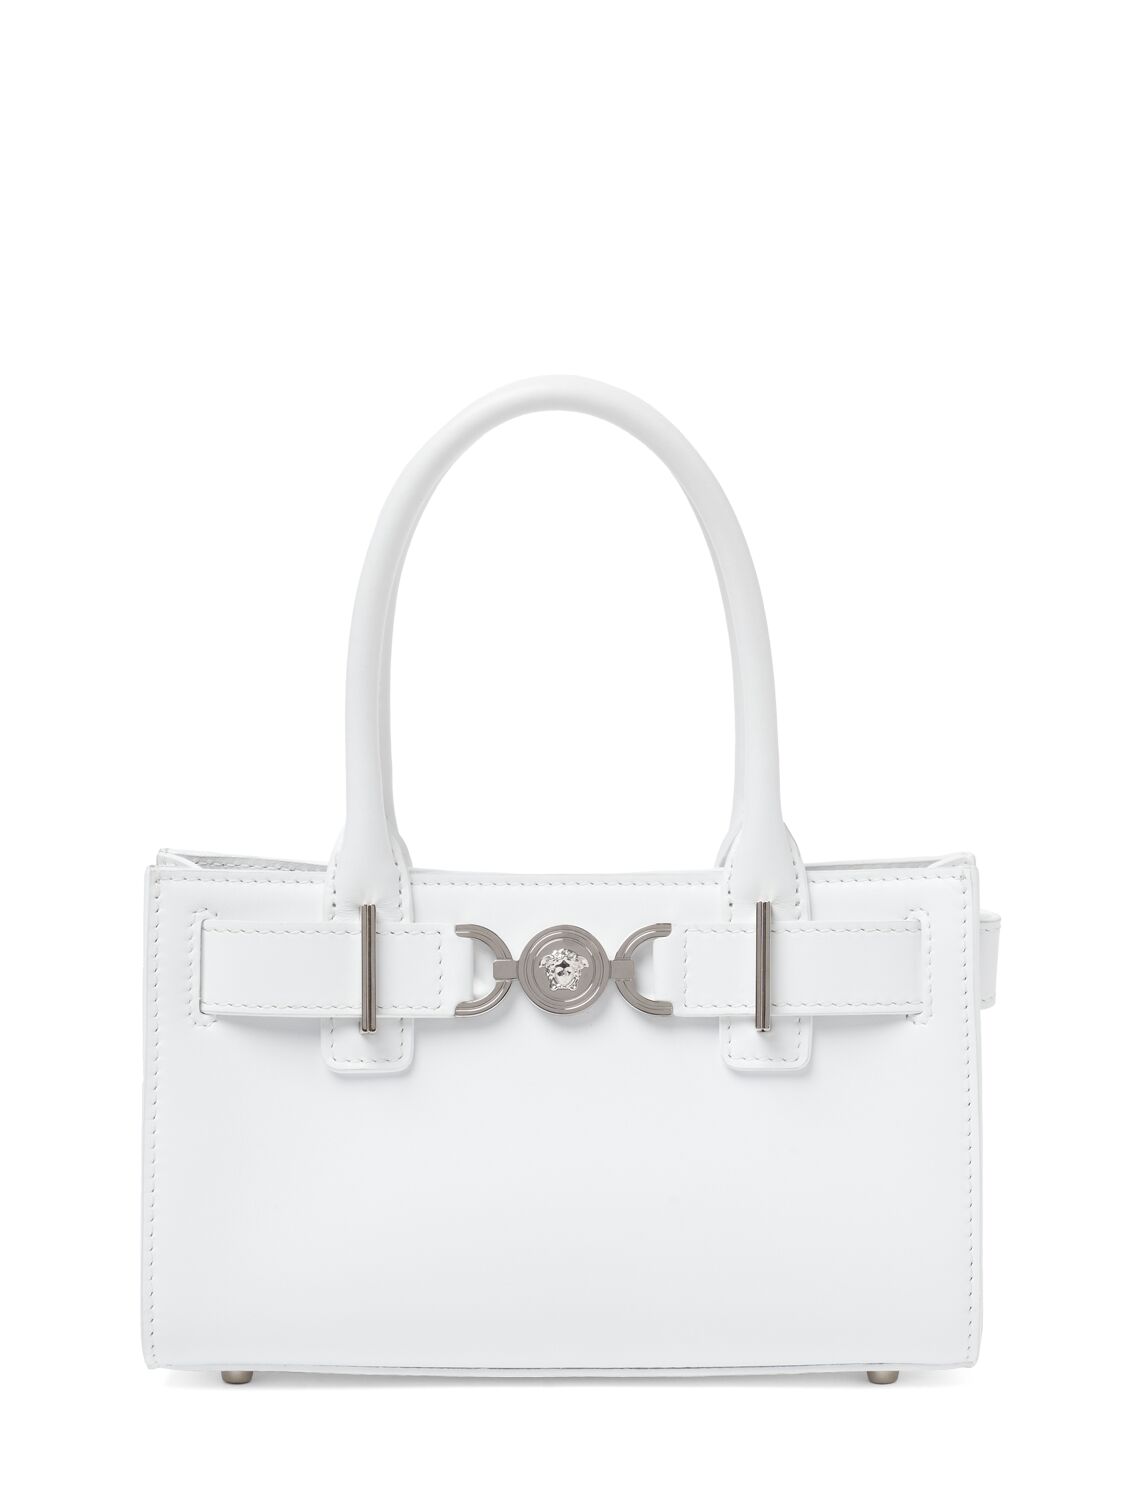 Versace Small Leather Top Handle Bag In White Optical